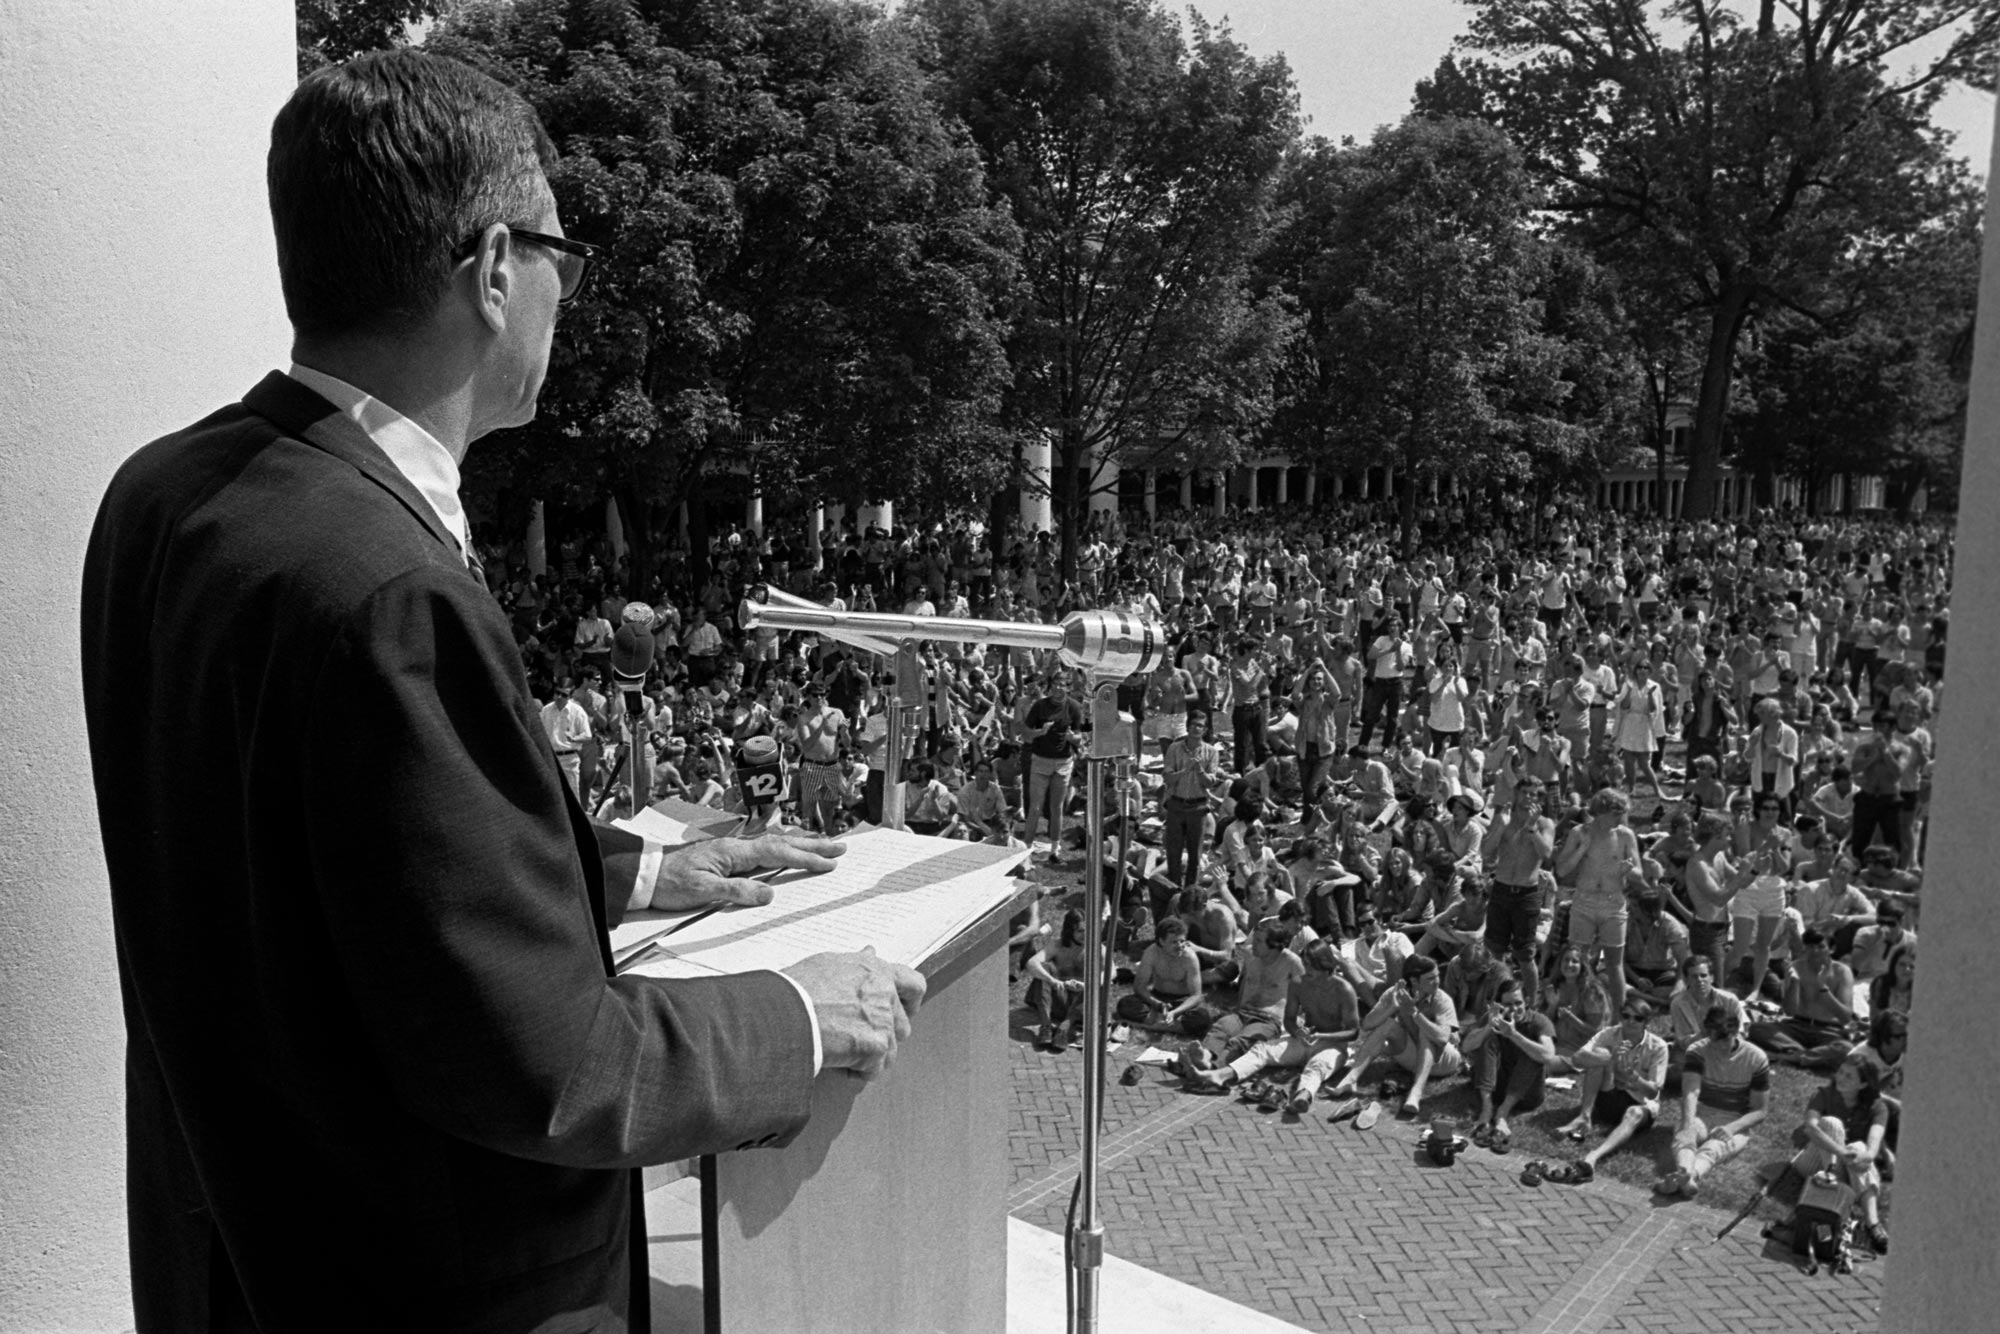 Black and white image of President Shannon speaking at a podium to a massive crowd on the Lawn